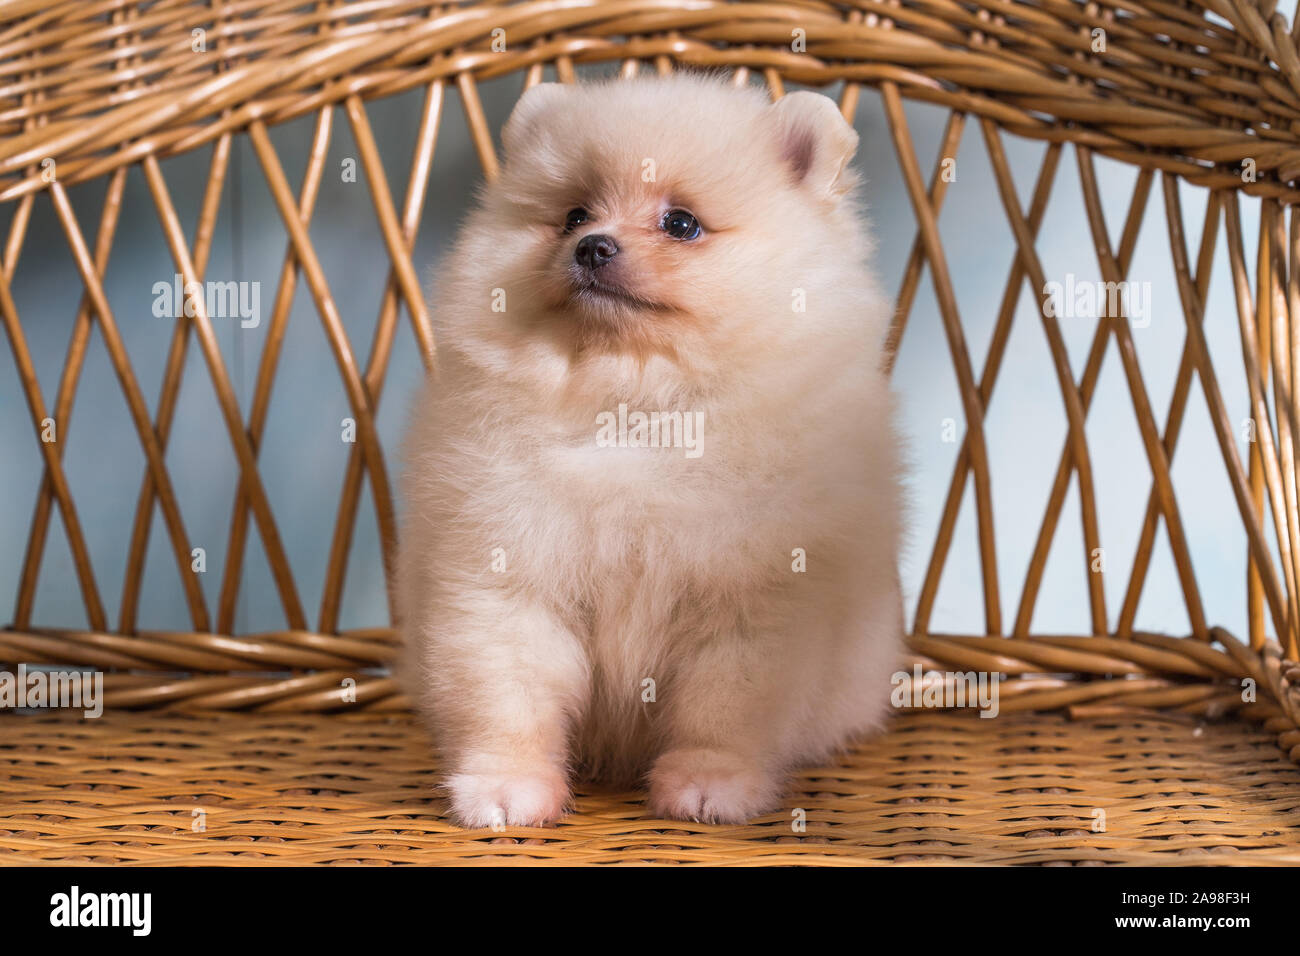 Cute puppy of miniature Pomeranian Spitz Zwergspitz or Dwarf Spitz white-cream color on a chair. Small dog is two month old. Stock Photo